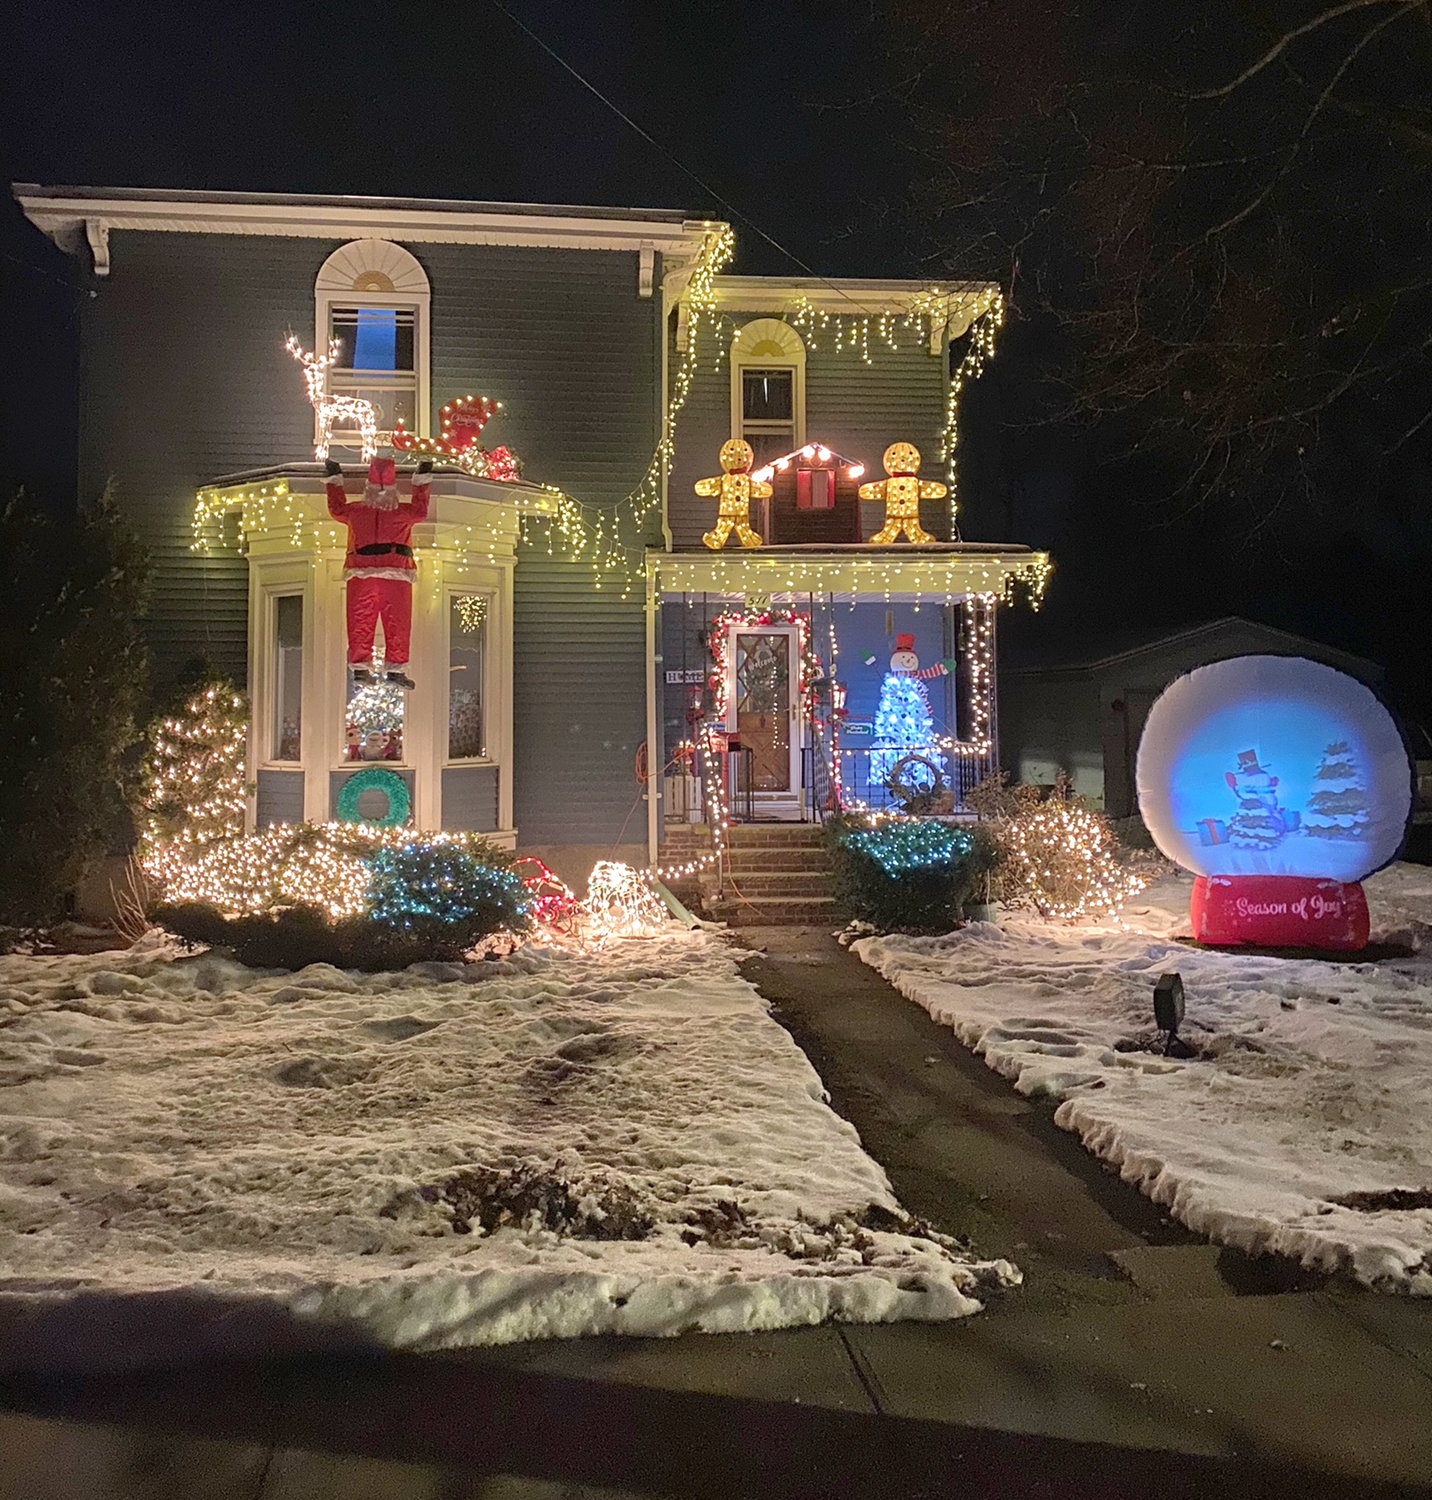 THIRD PLACE — Oneida’s first Light Fight saw Jennifer Kimball and her family, of 511 Seneca St., take home third prize and numerous gift cards from local businesses. The home featured festive lights, decorations, and Santa Claus in a sticky situation.